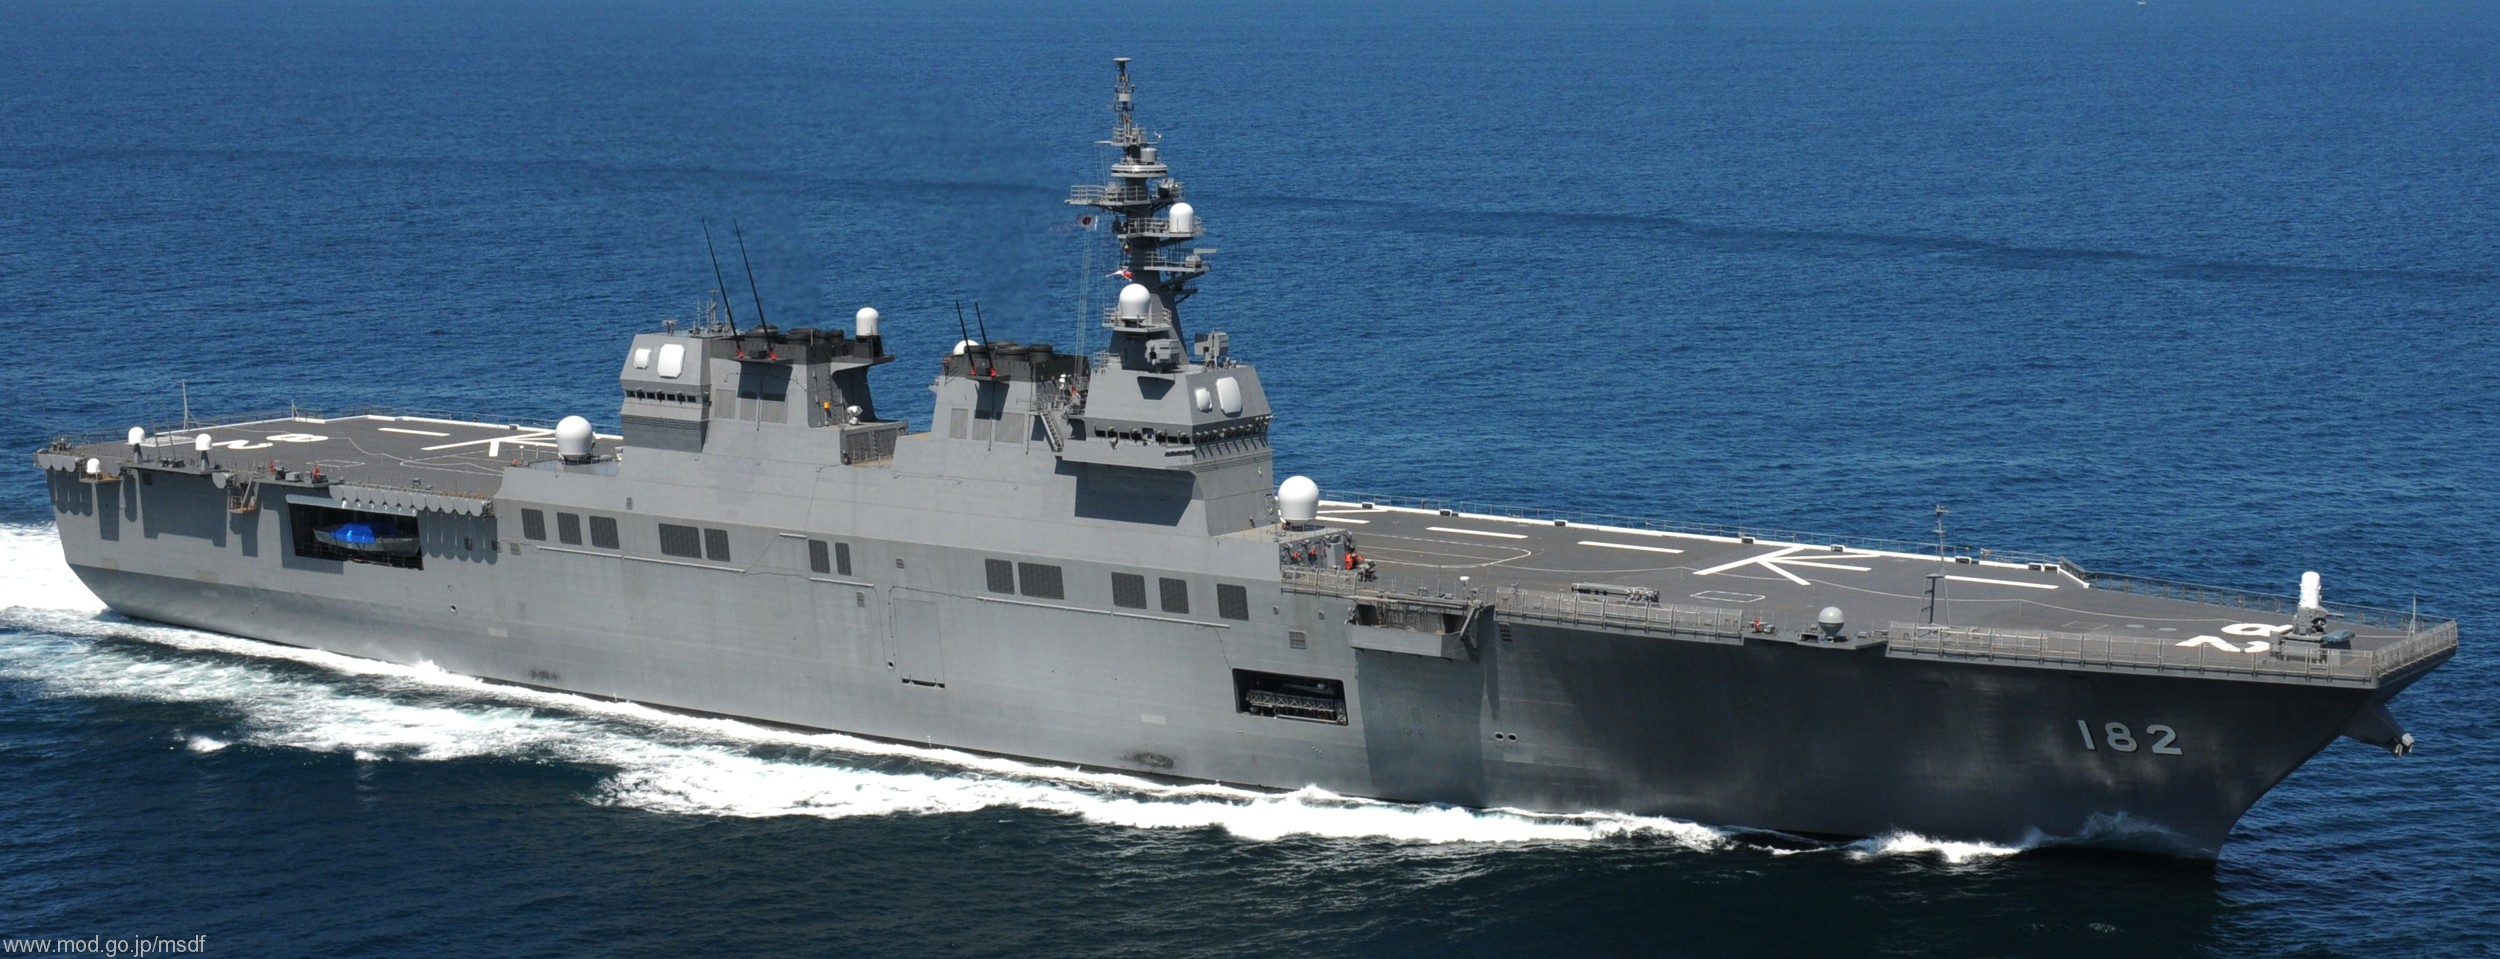 ddh-182 jds ise hyuga class helicopter destroyer japan maritime self defense force jmsdf 15